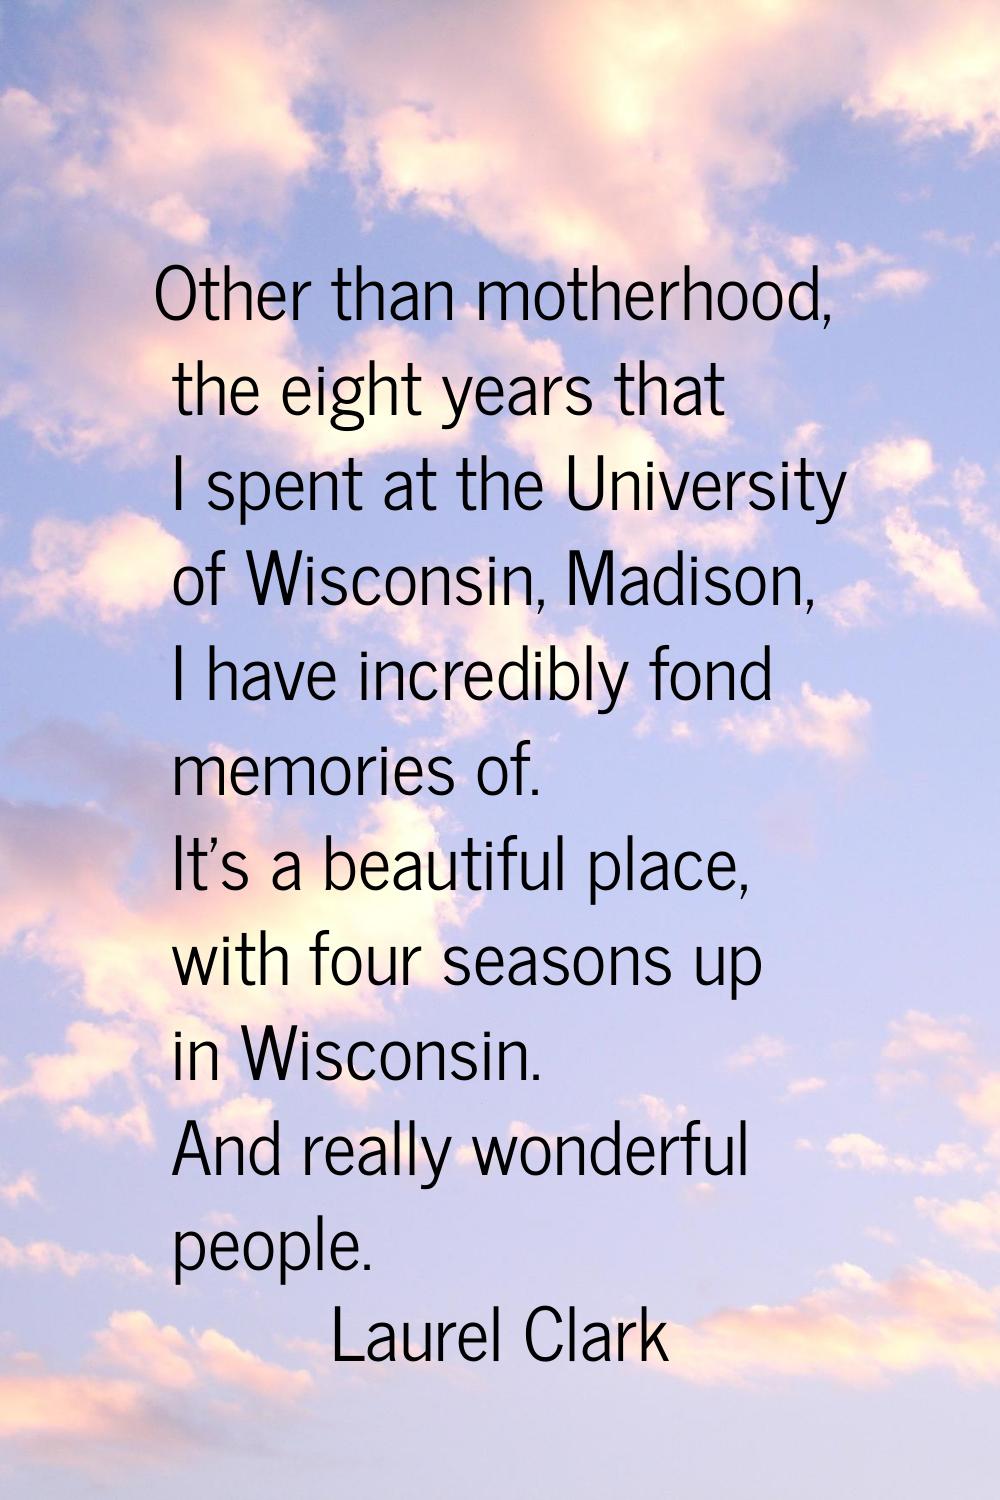 Other than motherhood, the eight years that I spent at the University of Wisconsin, Madison, I have